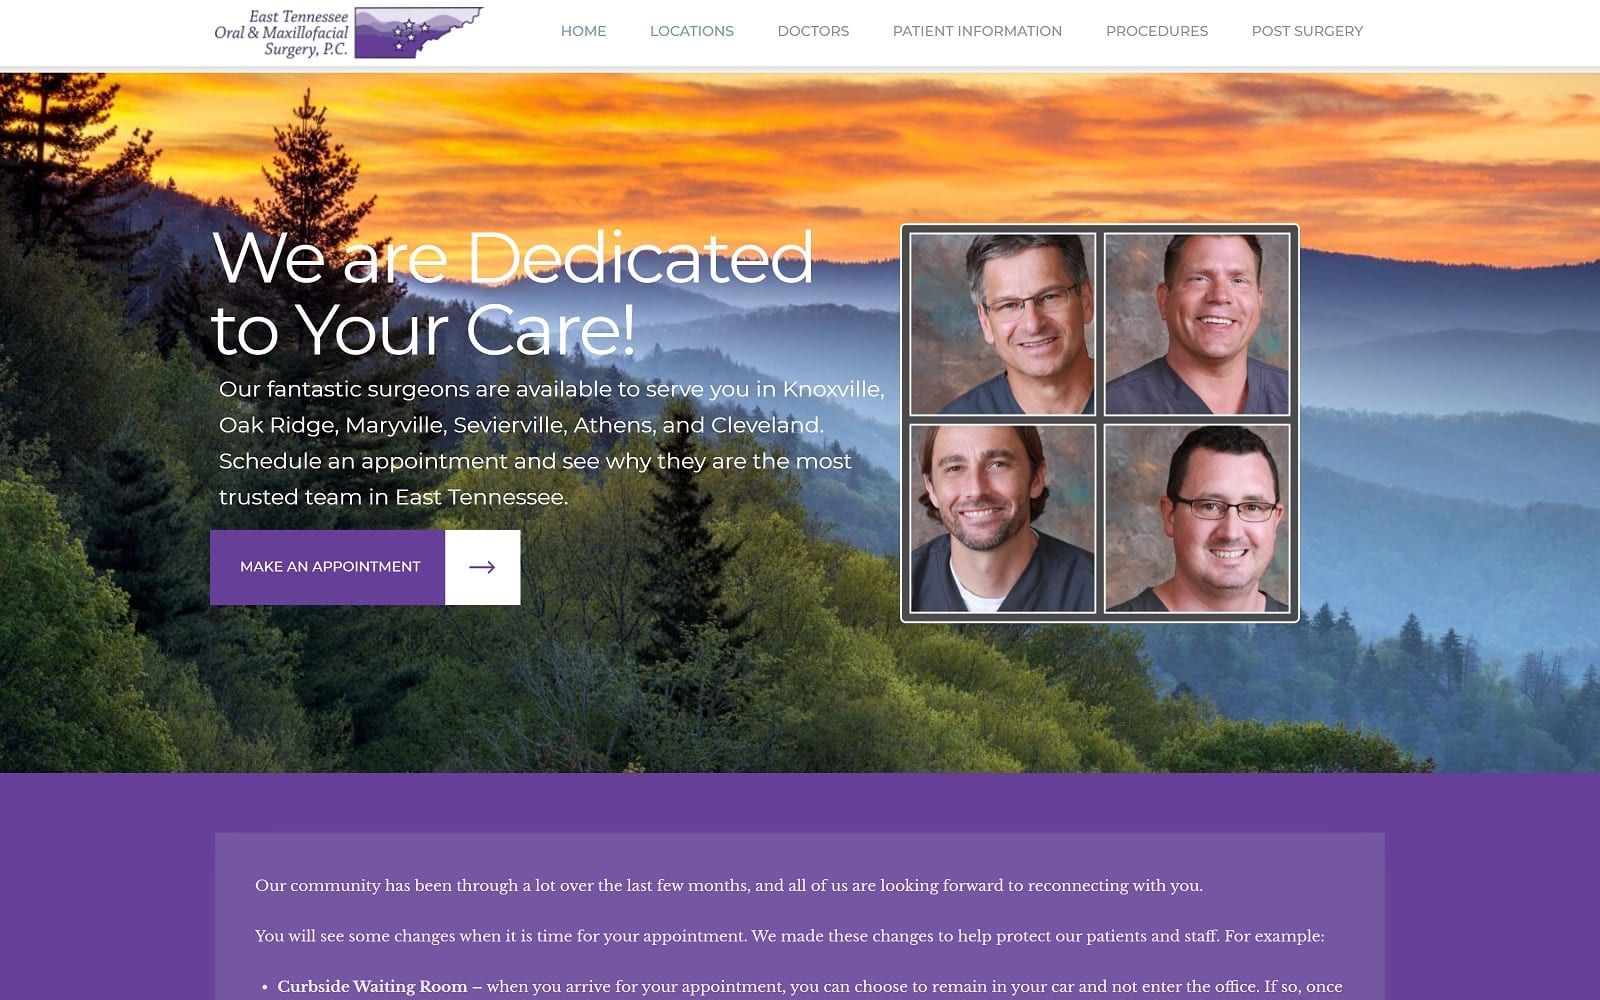 The Screenshot of East Tennessee Oral & Maxillofacial Surgery - Knoxville North etoms.com Website
